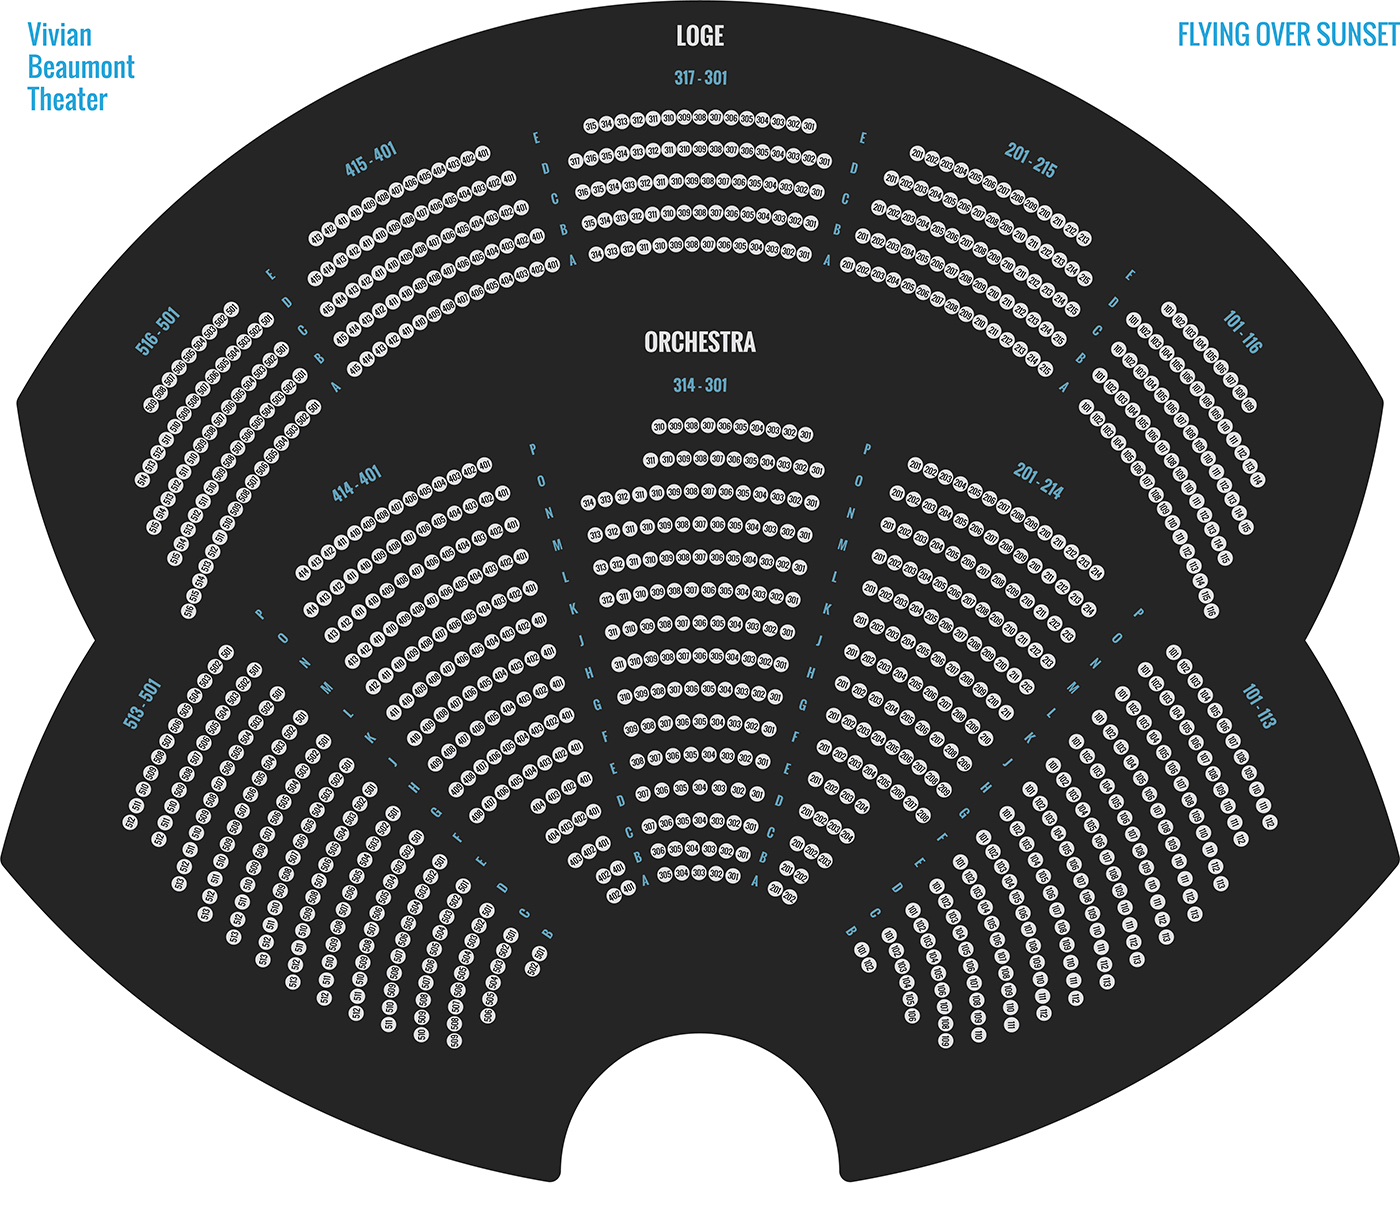 Lincoln Center Seating Chart Beaumont